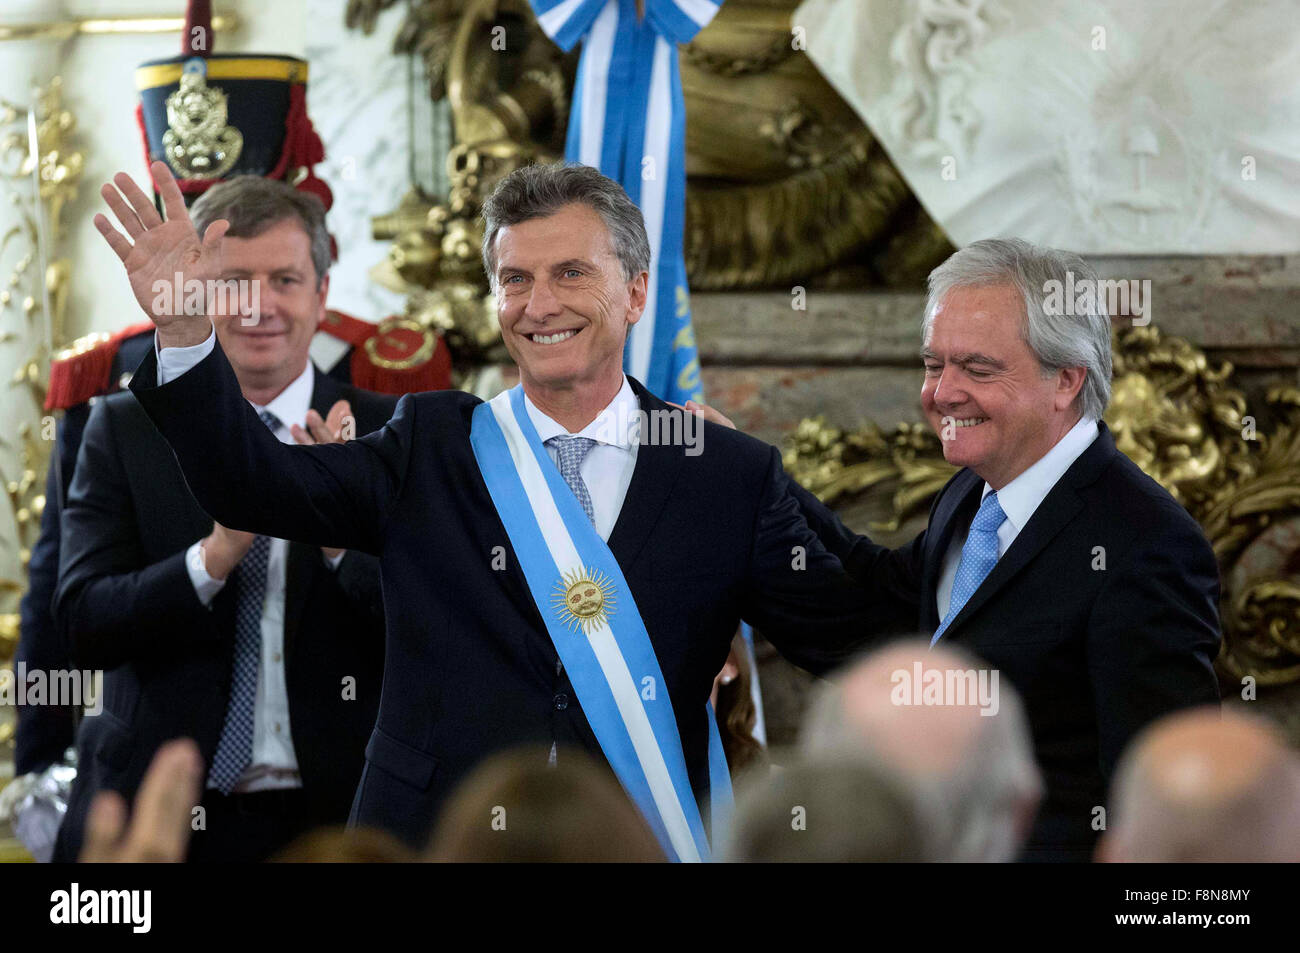 Buenos Aires, Argentina. 10th Dec, 2015. Argentina's new President Mauricio Macri (C) waves after receiving the presidential sash from the provisional President of the Argentine Senate Federico Pinedo (R) at White Room of Casa Rosada (Pink House), in Buenos Aires city, capital of Argentina, on Dec. 10, 2015. Mauricio Macri on Thursday inaugurated as new Argentine President, succeeding Cristina Fernandez. Credit:  Martin Zabala/Xinhua/Alamy Live News Stock Photo